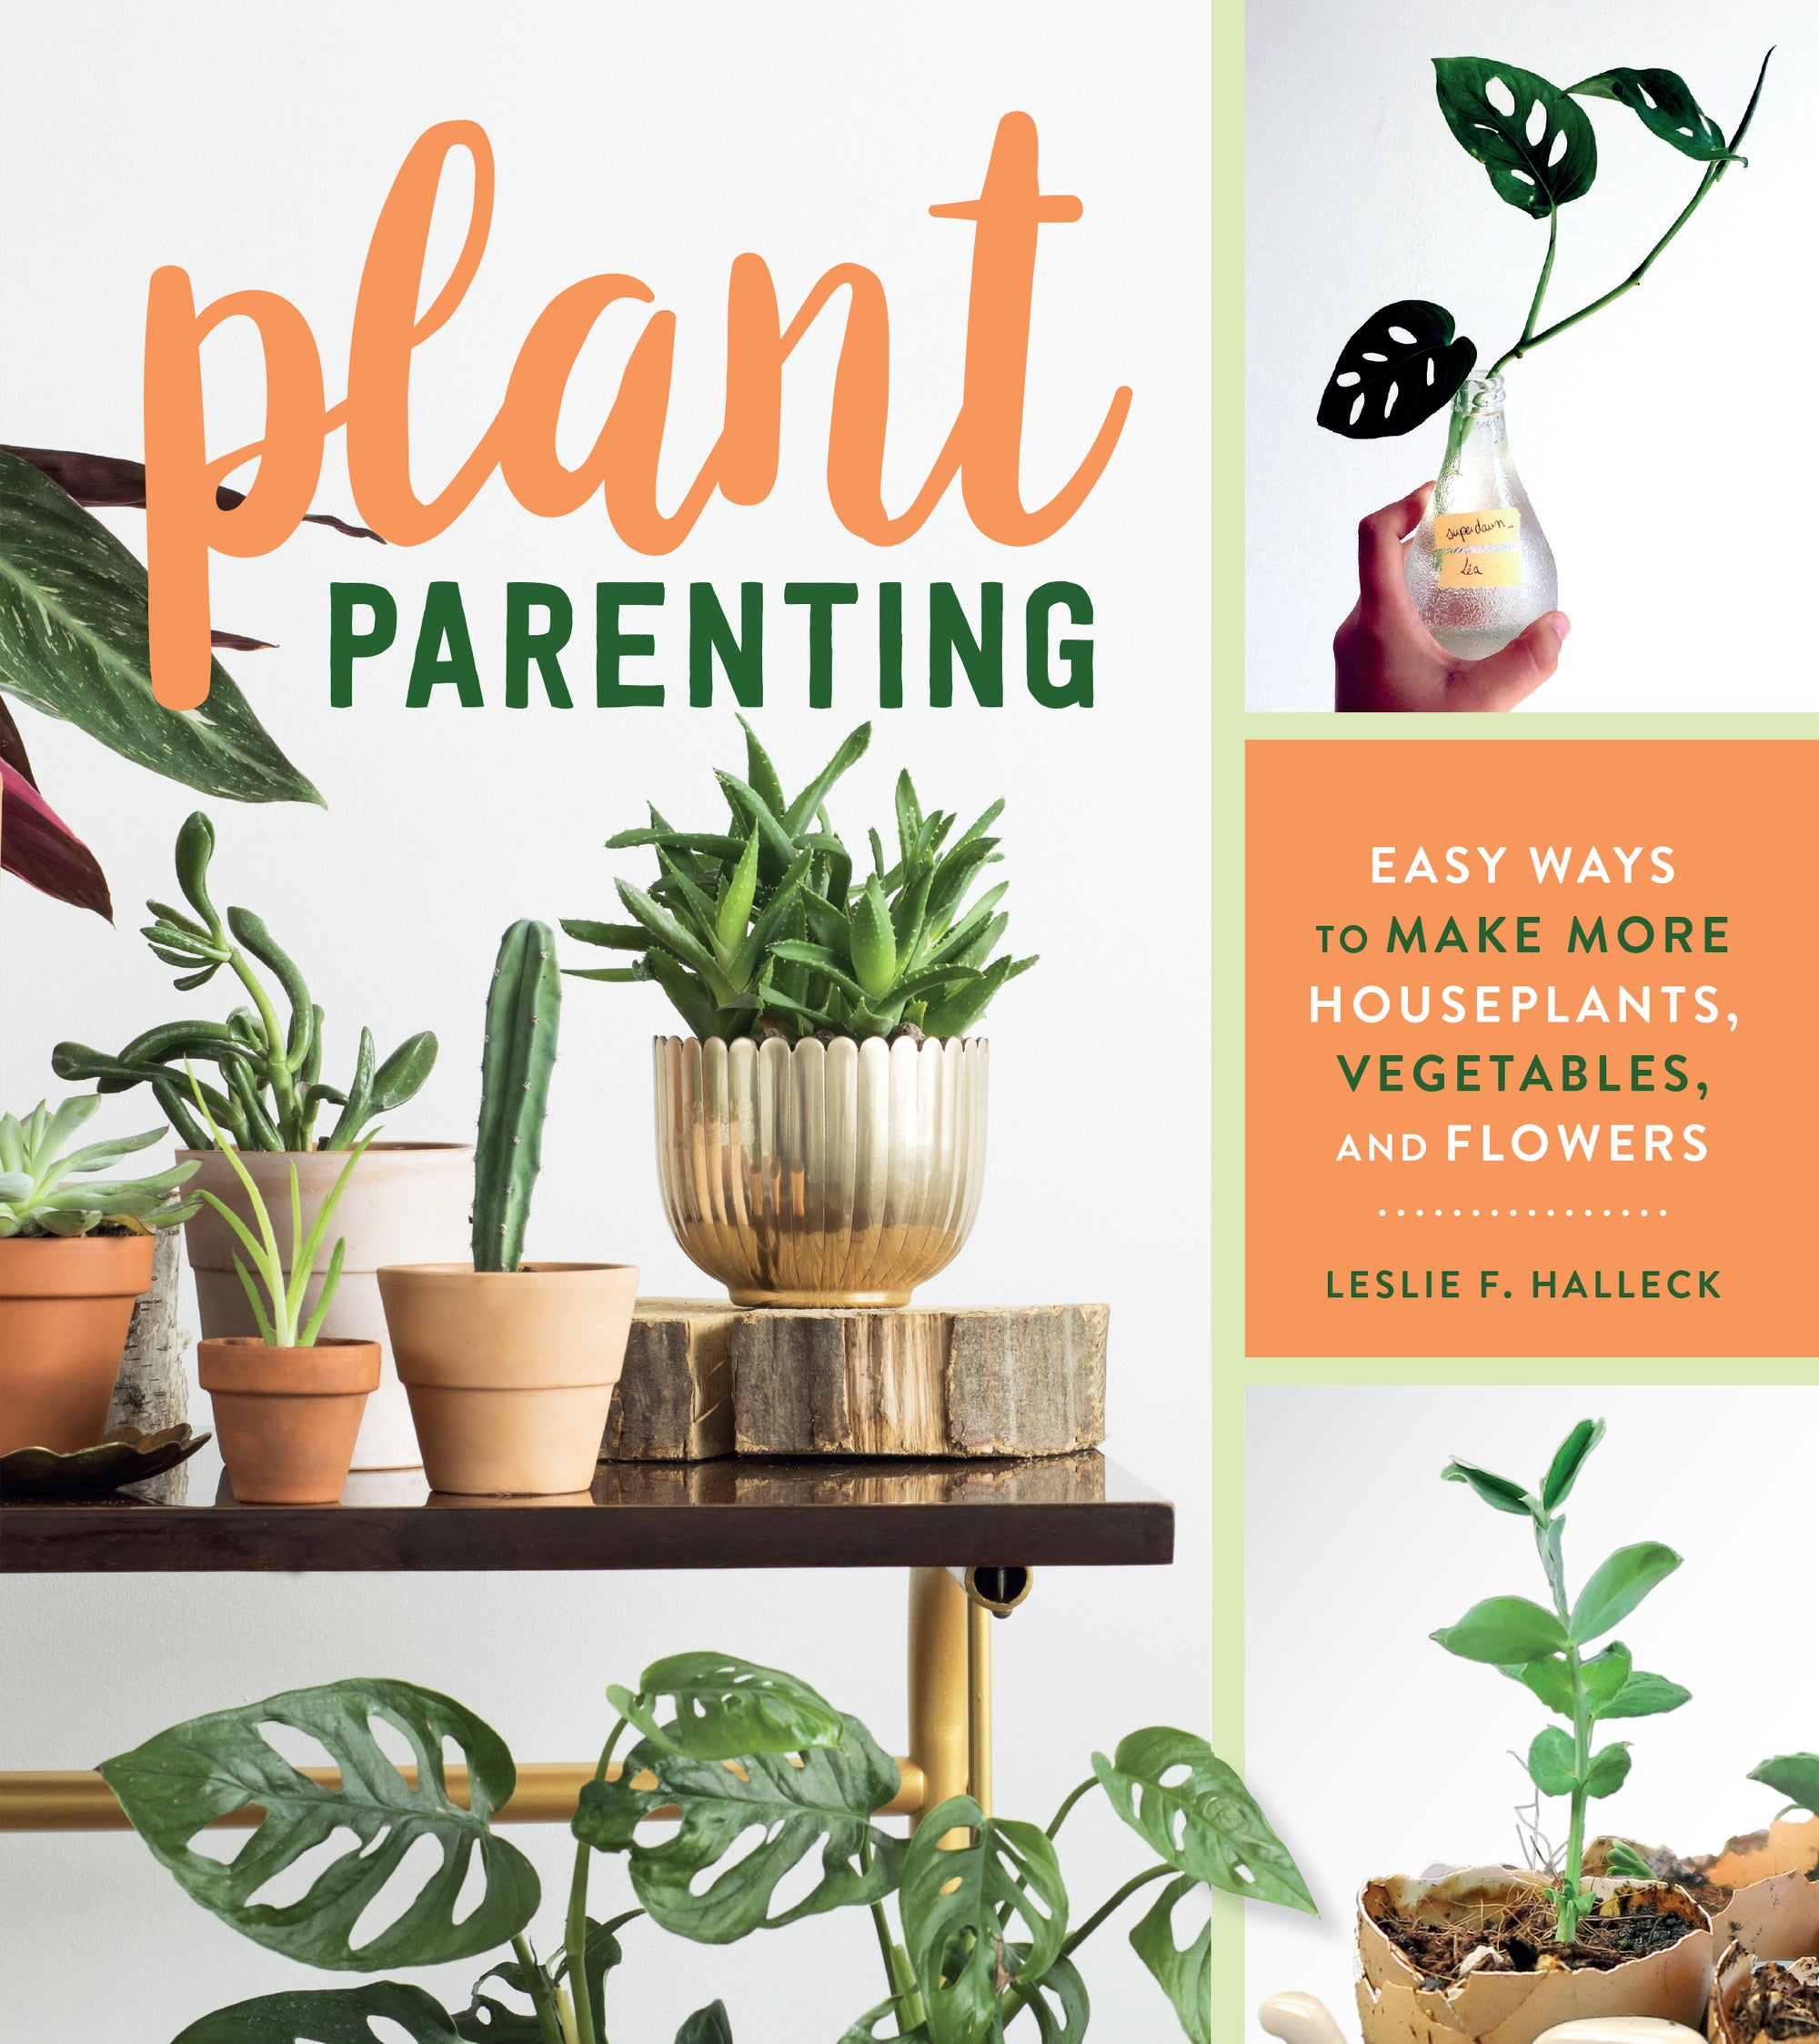 A variety of houseplants are featured on the cover, including monstera, cacti, and more.